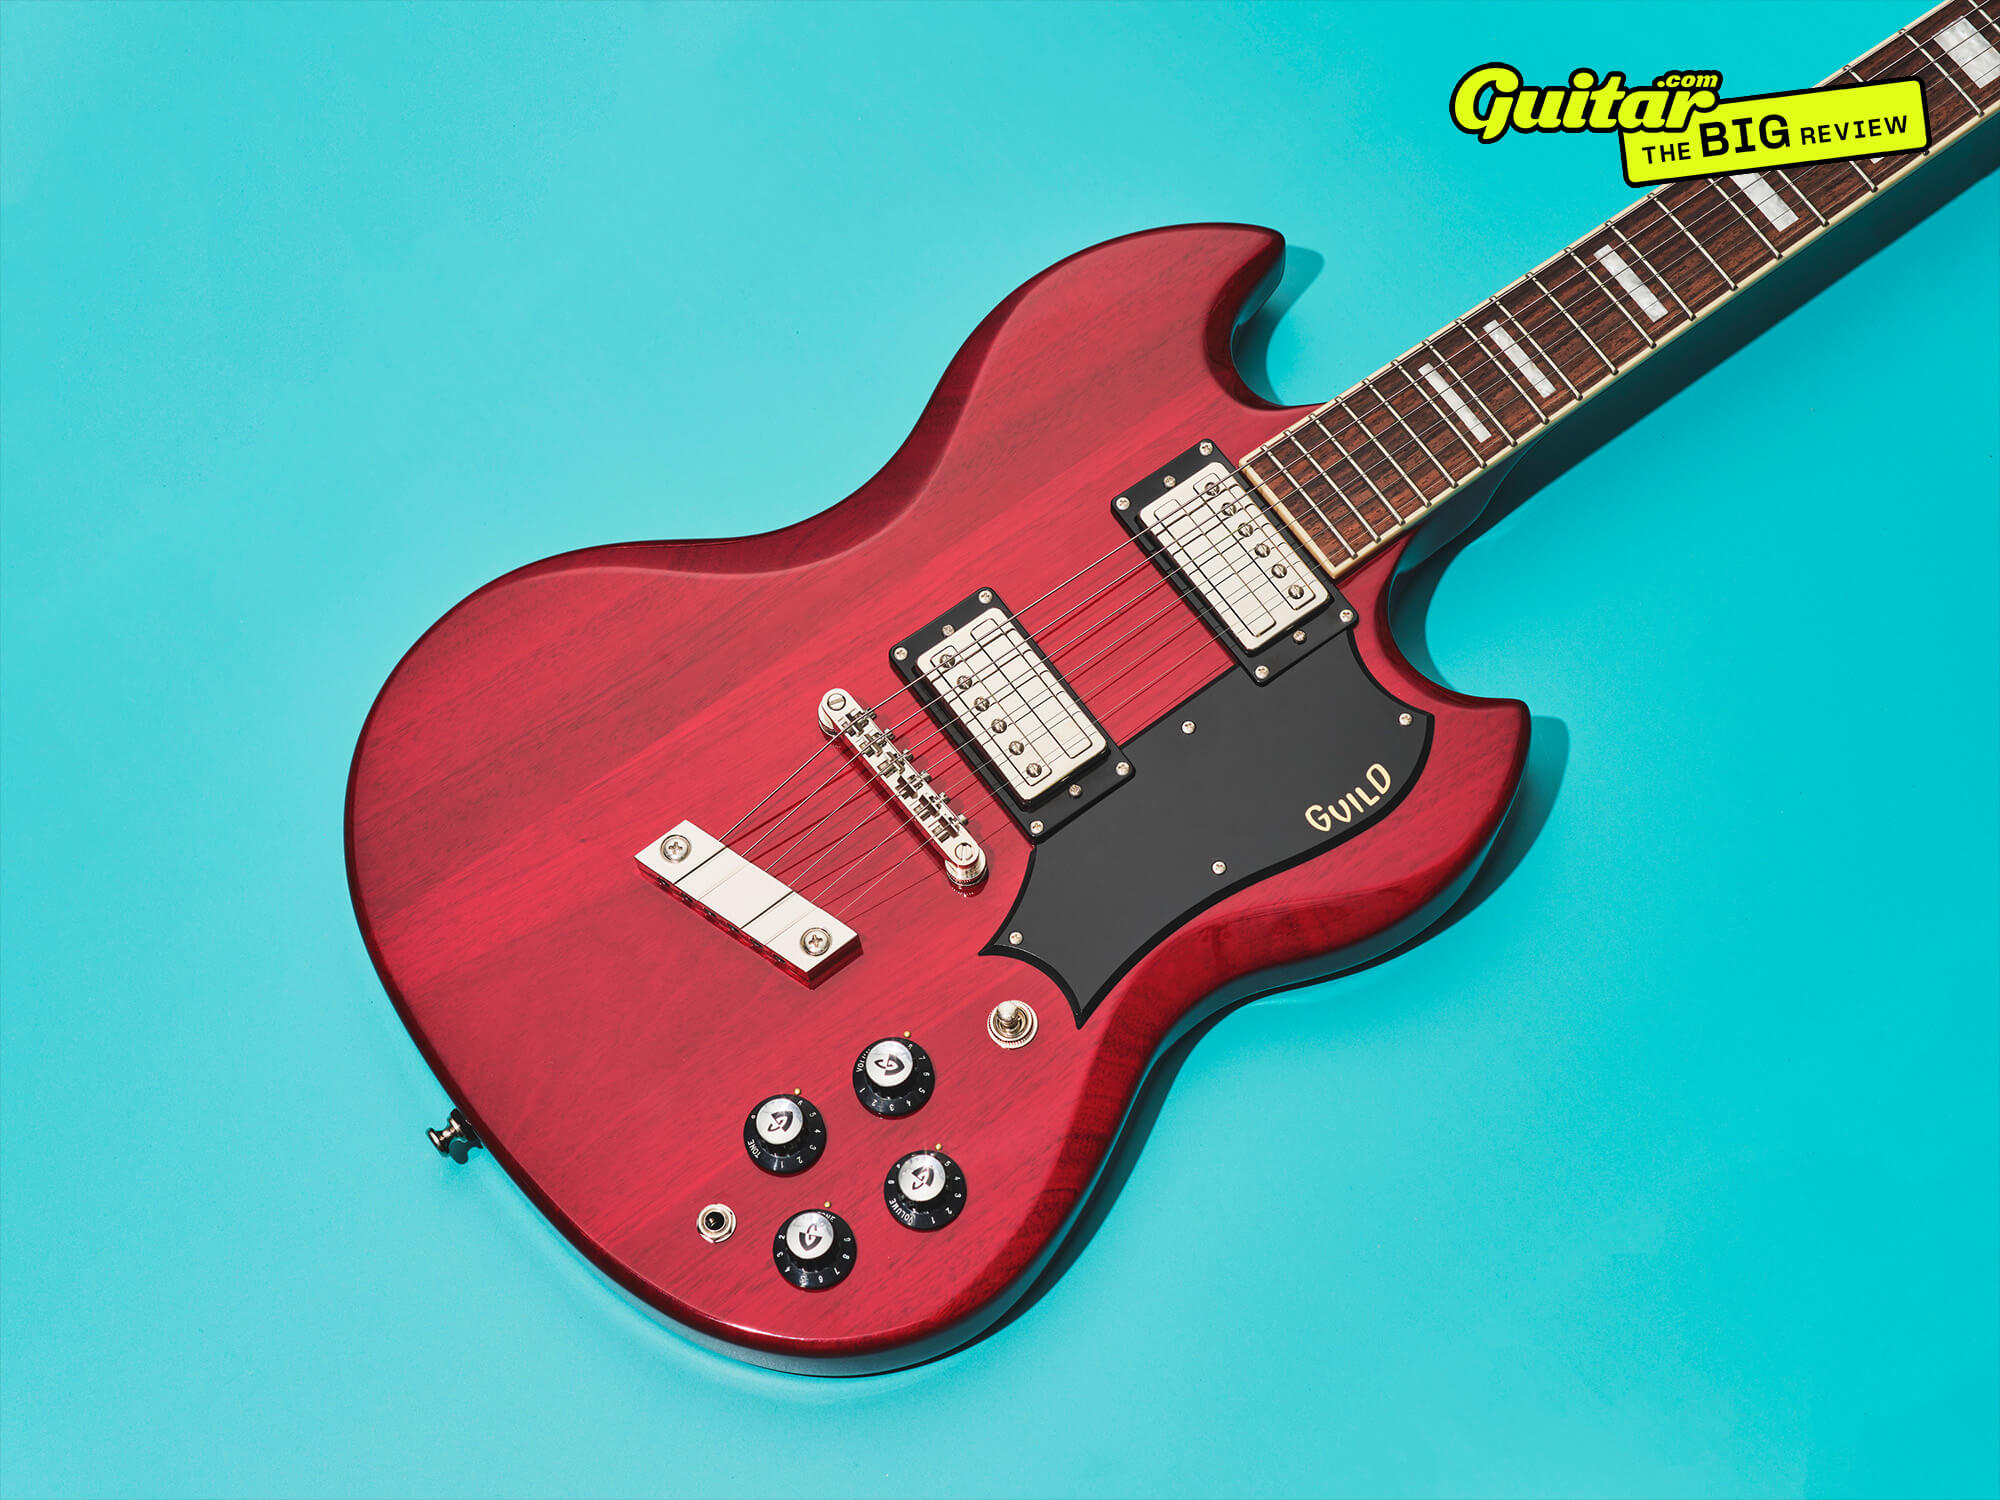 Guild Polara Deluxe in cherry red, photo by Adam Gasson